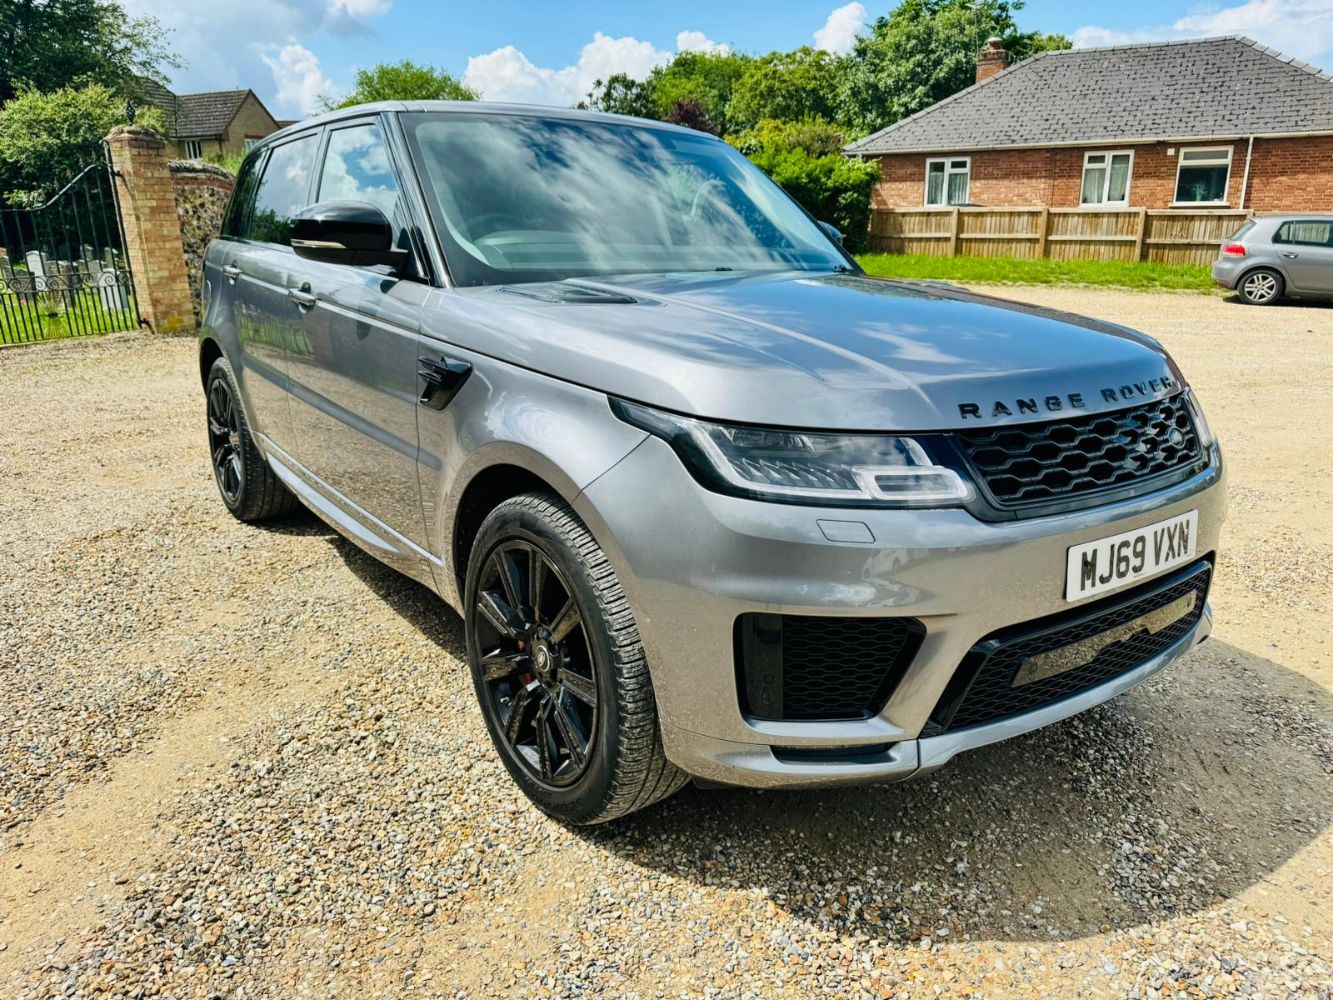 WEEKELY SALE OF HIGH VALUE LOTS - INCLUDING LUXURY CARS AND LIGHT COMMERCIALS